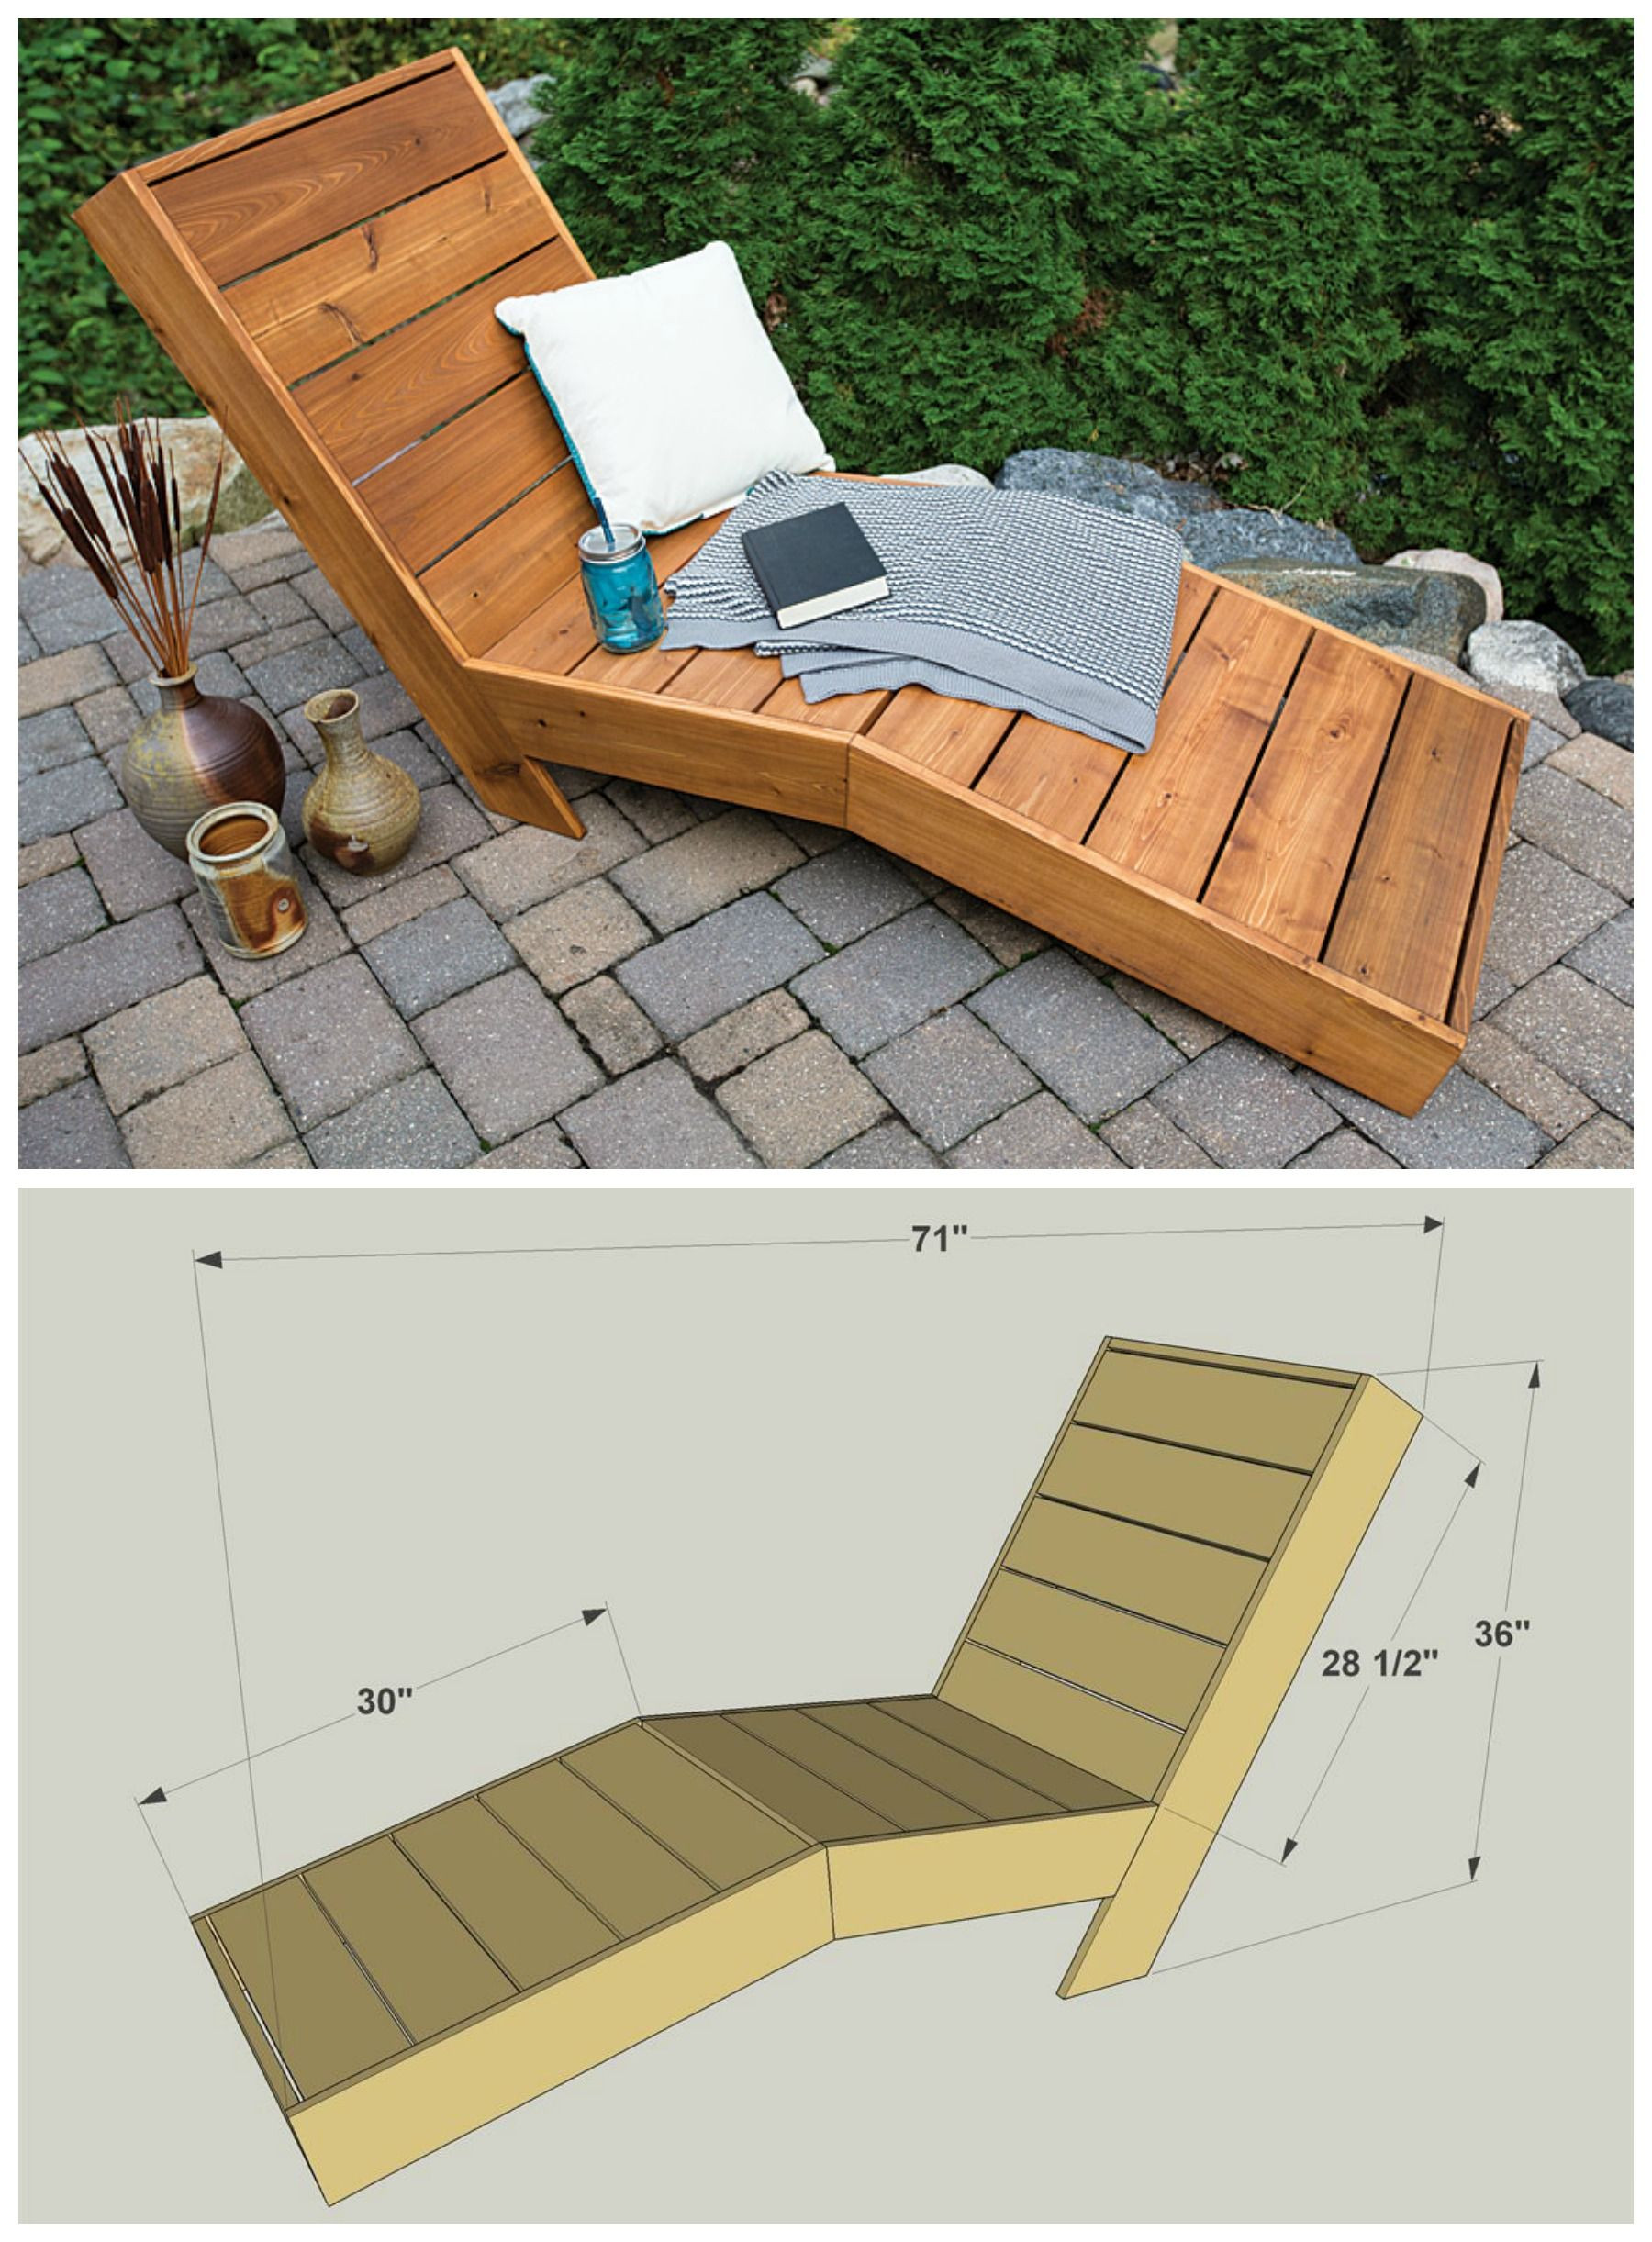 DIY Outdoor Chaise Lounge
 DIY Outdoor Chaise Lounge FREE PLANS at buildsomething